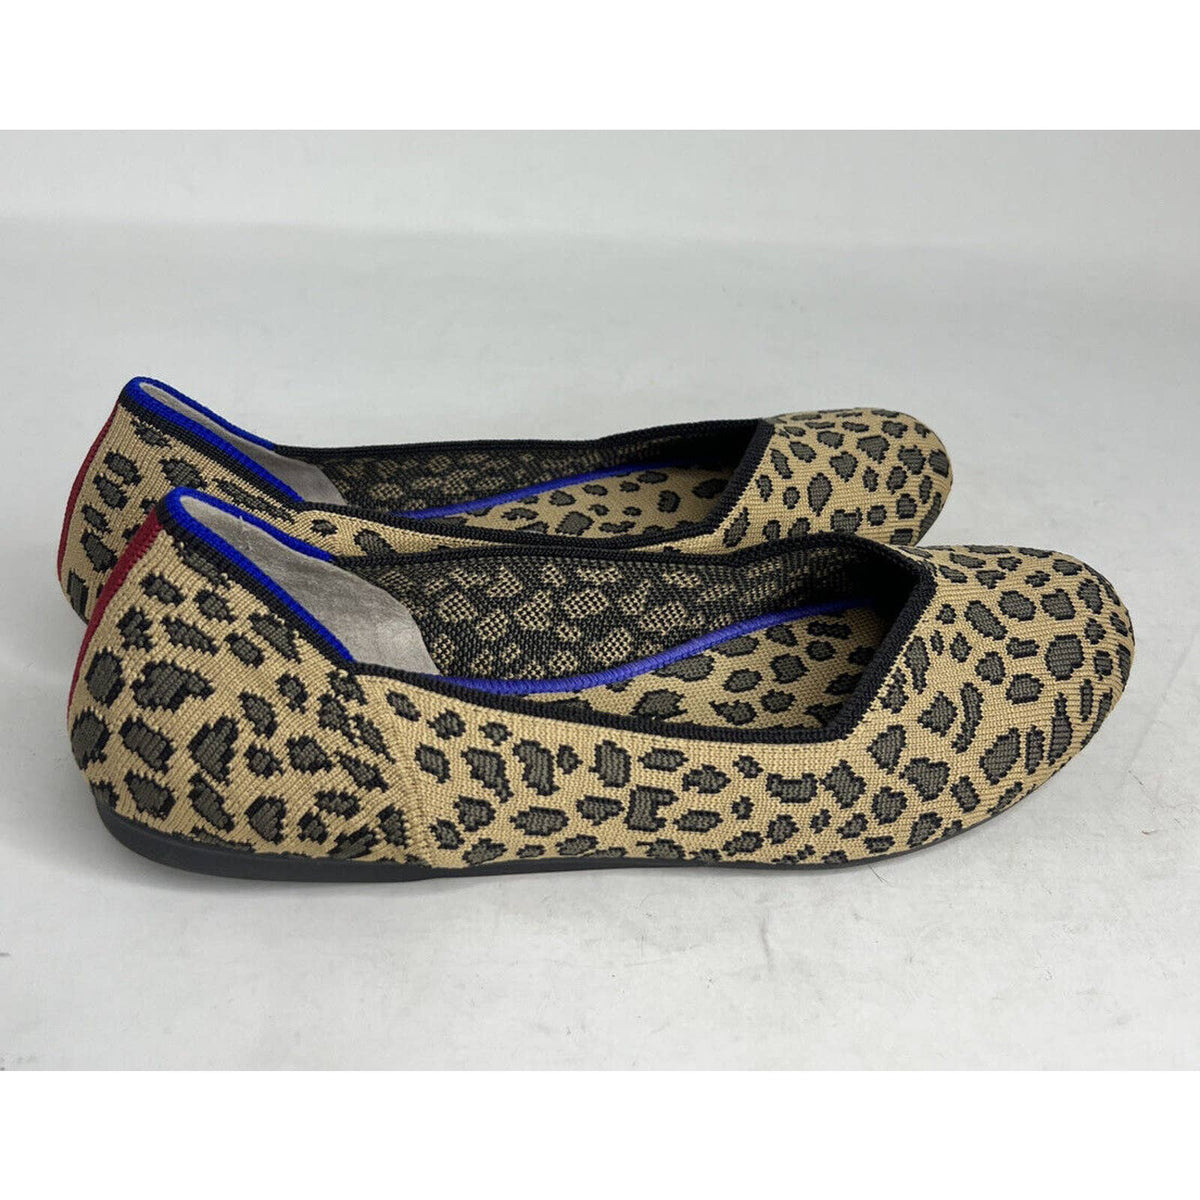 Rothys Spotted Round Toe Ballet Flats Sz.8.5